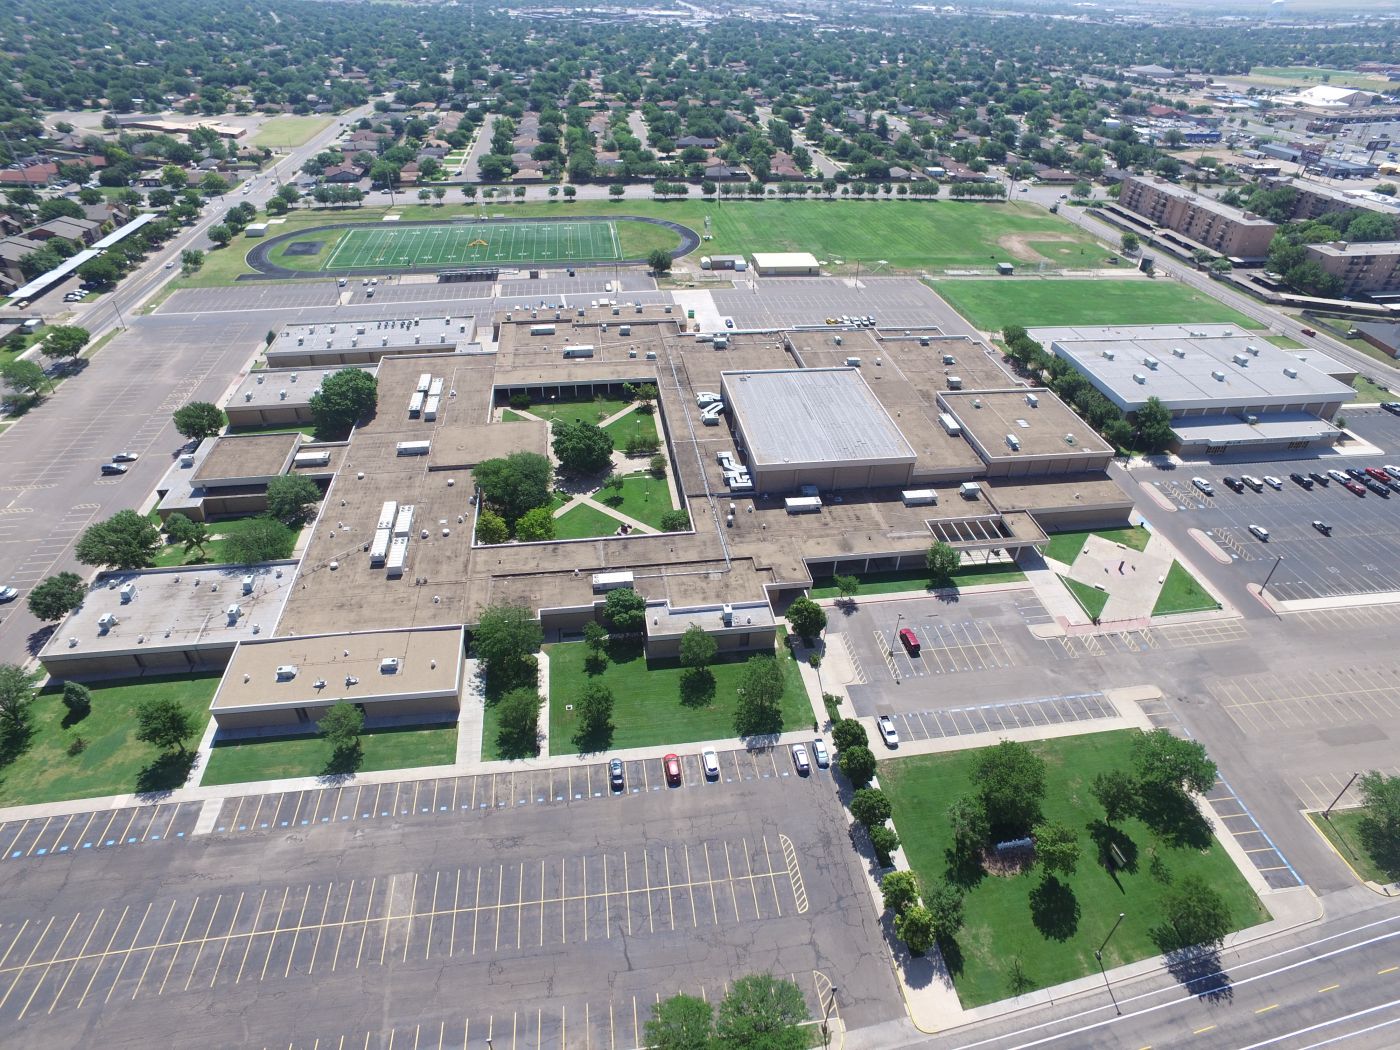 Amarillo High School - Aerial photo by Complete, 2017